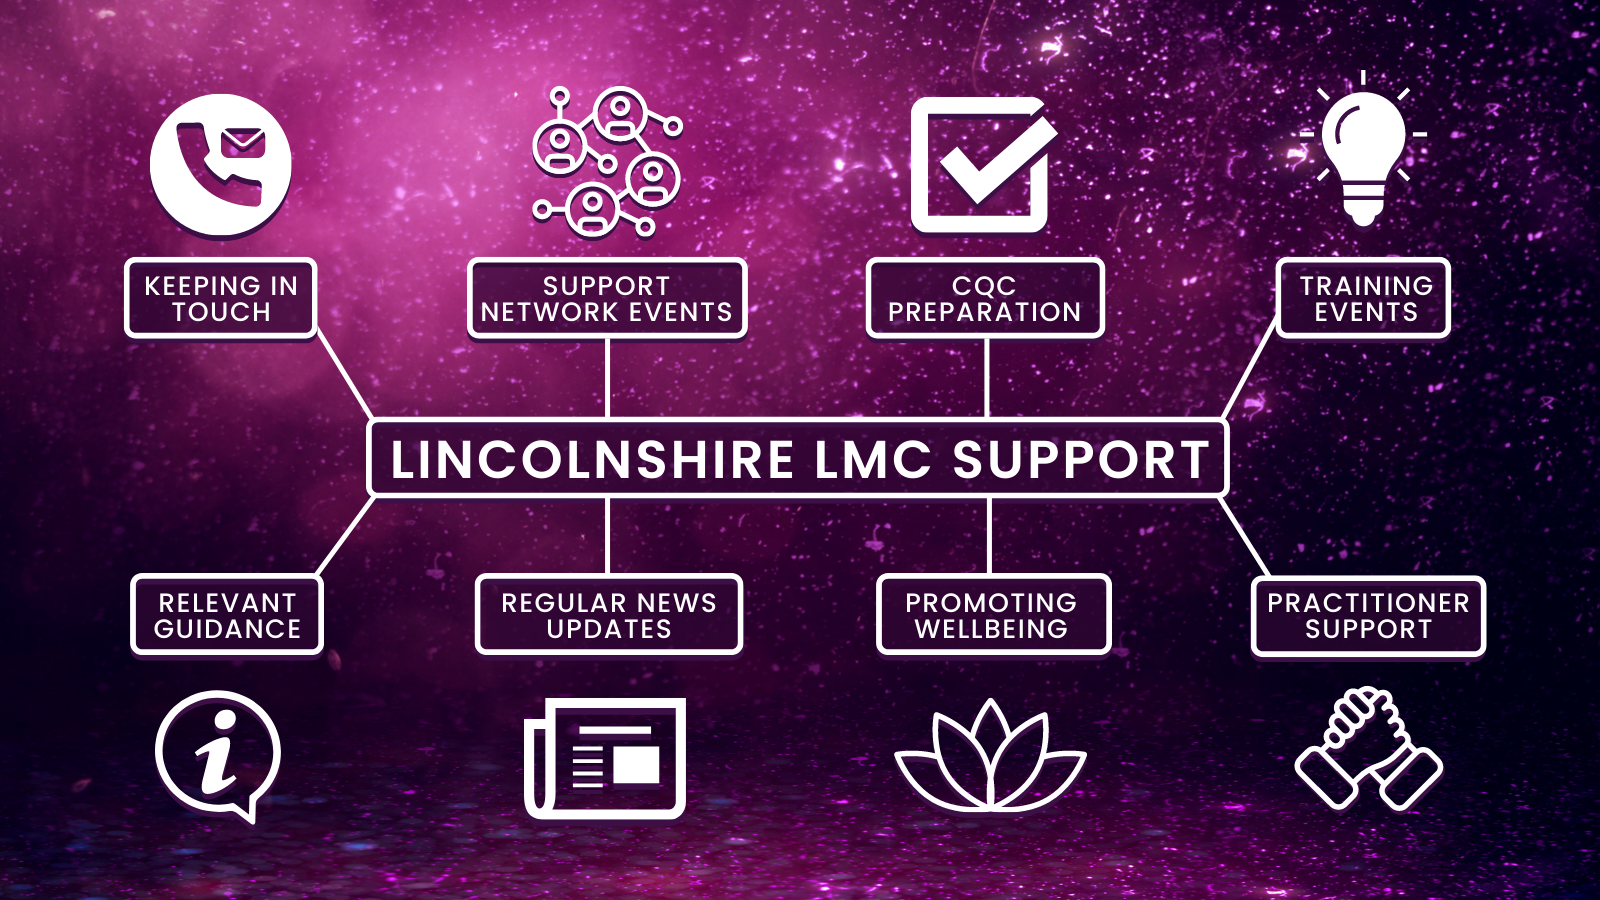 Map of support provide by Lincs LMC